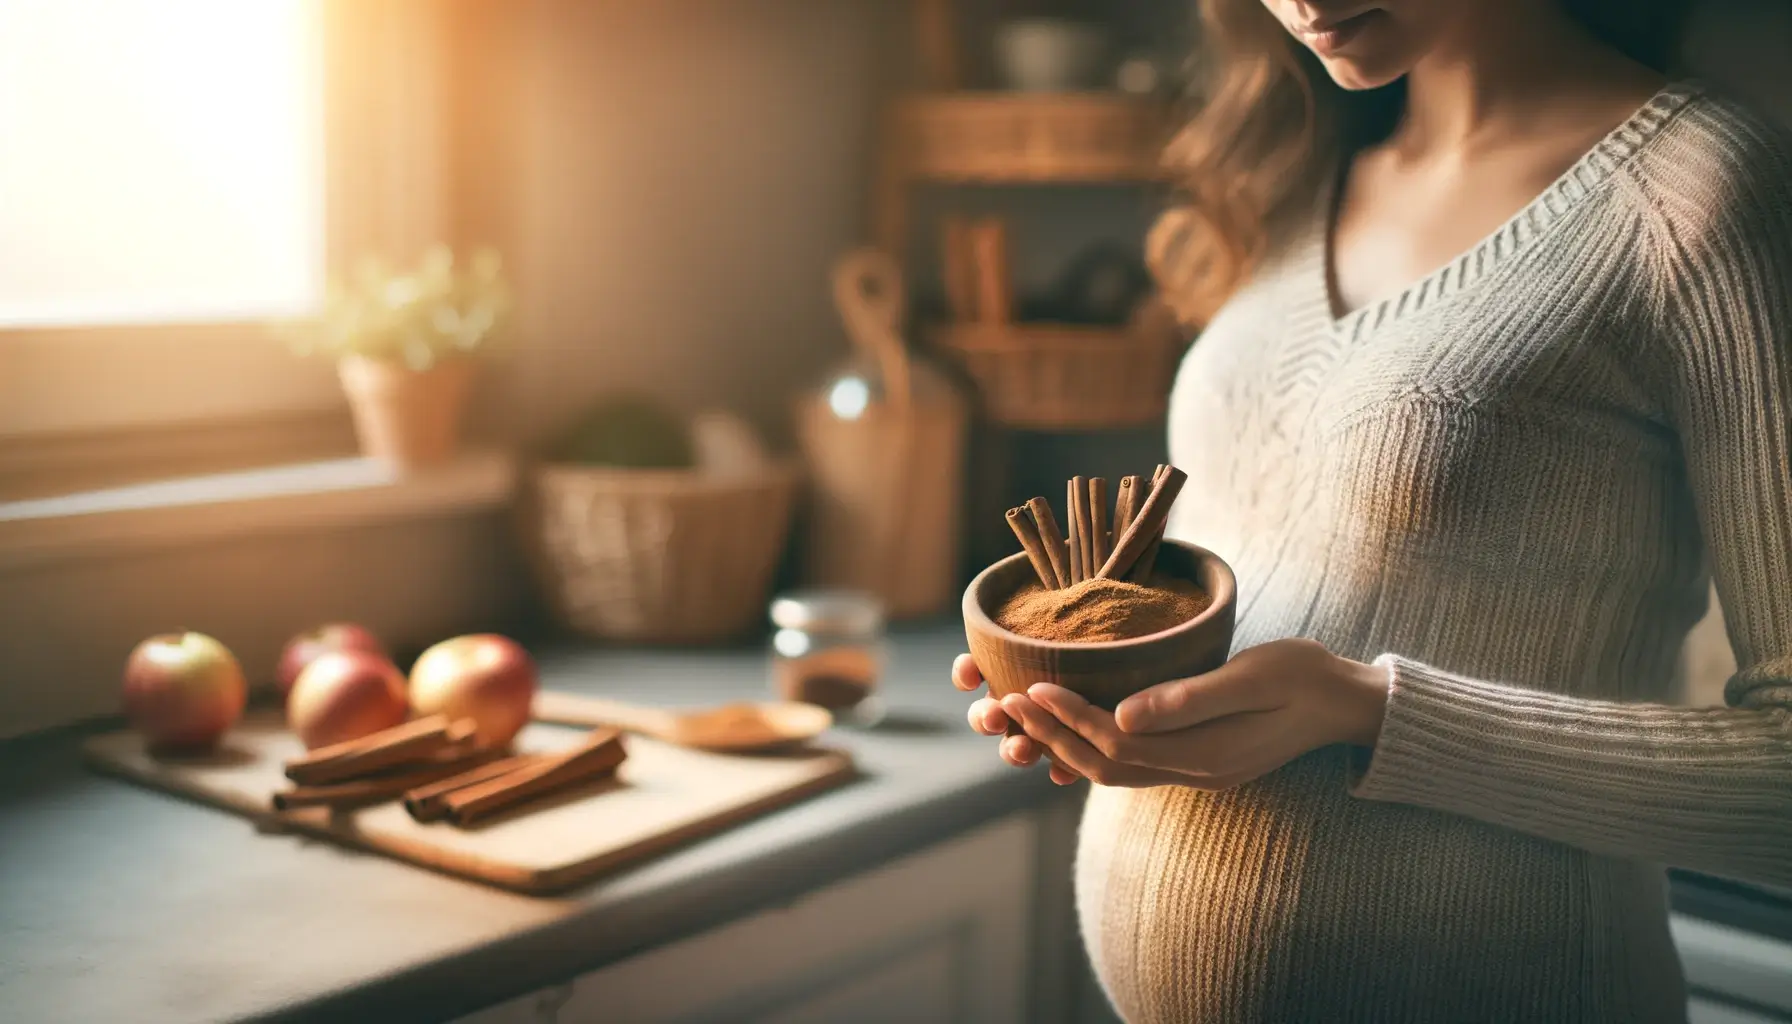 Pregnant woman in kitchen holding cinnamon, symbolizing article on cinnamon safety during pregnancy